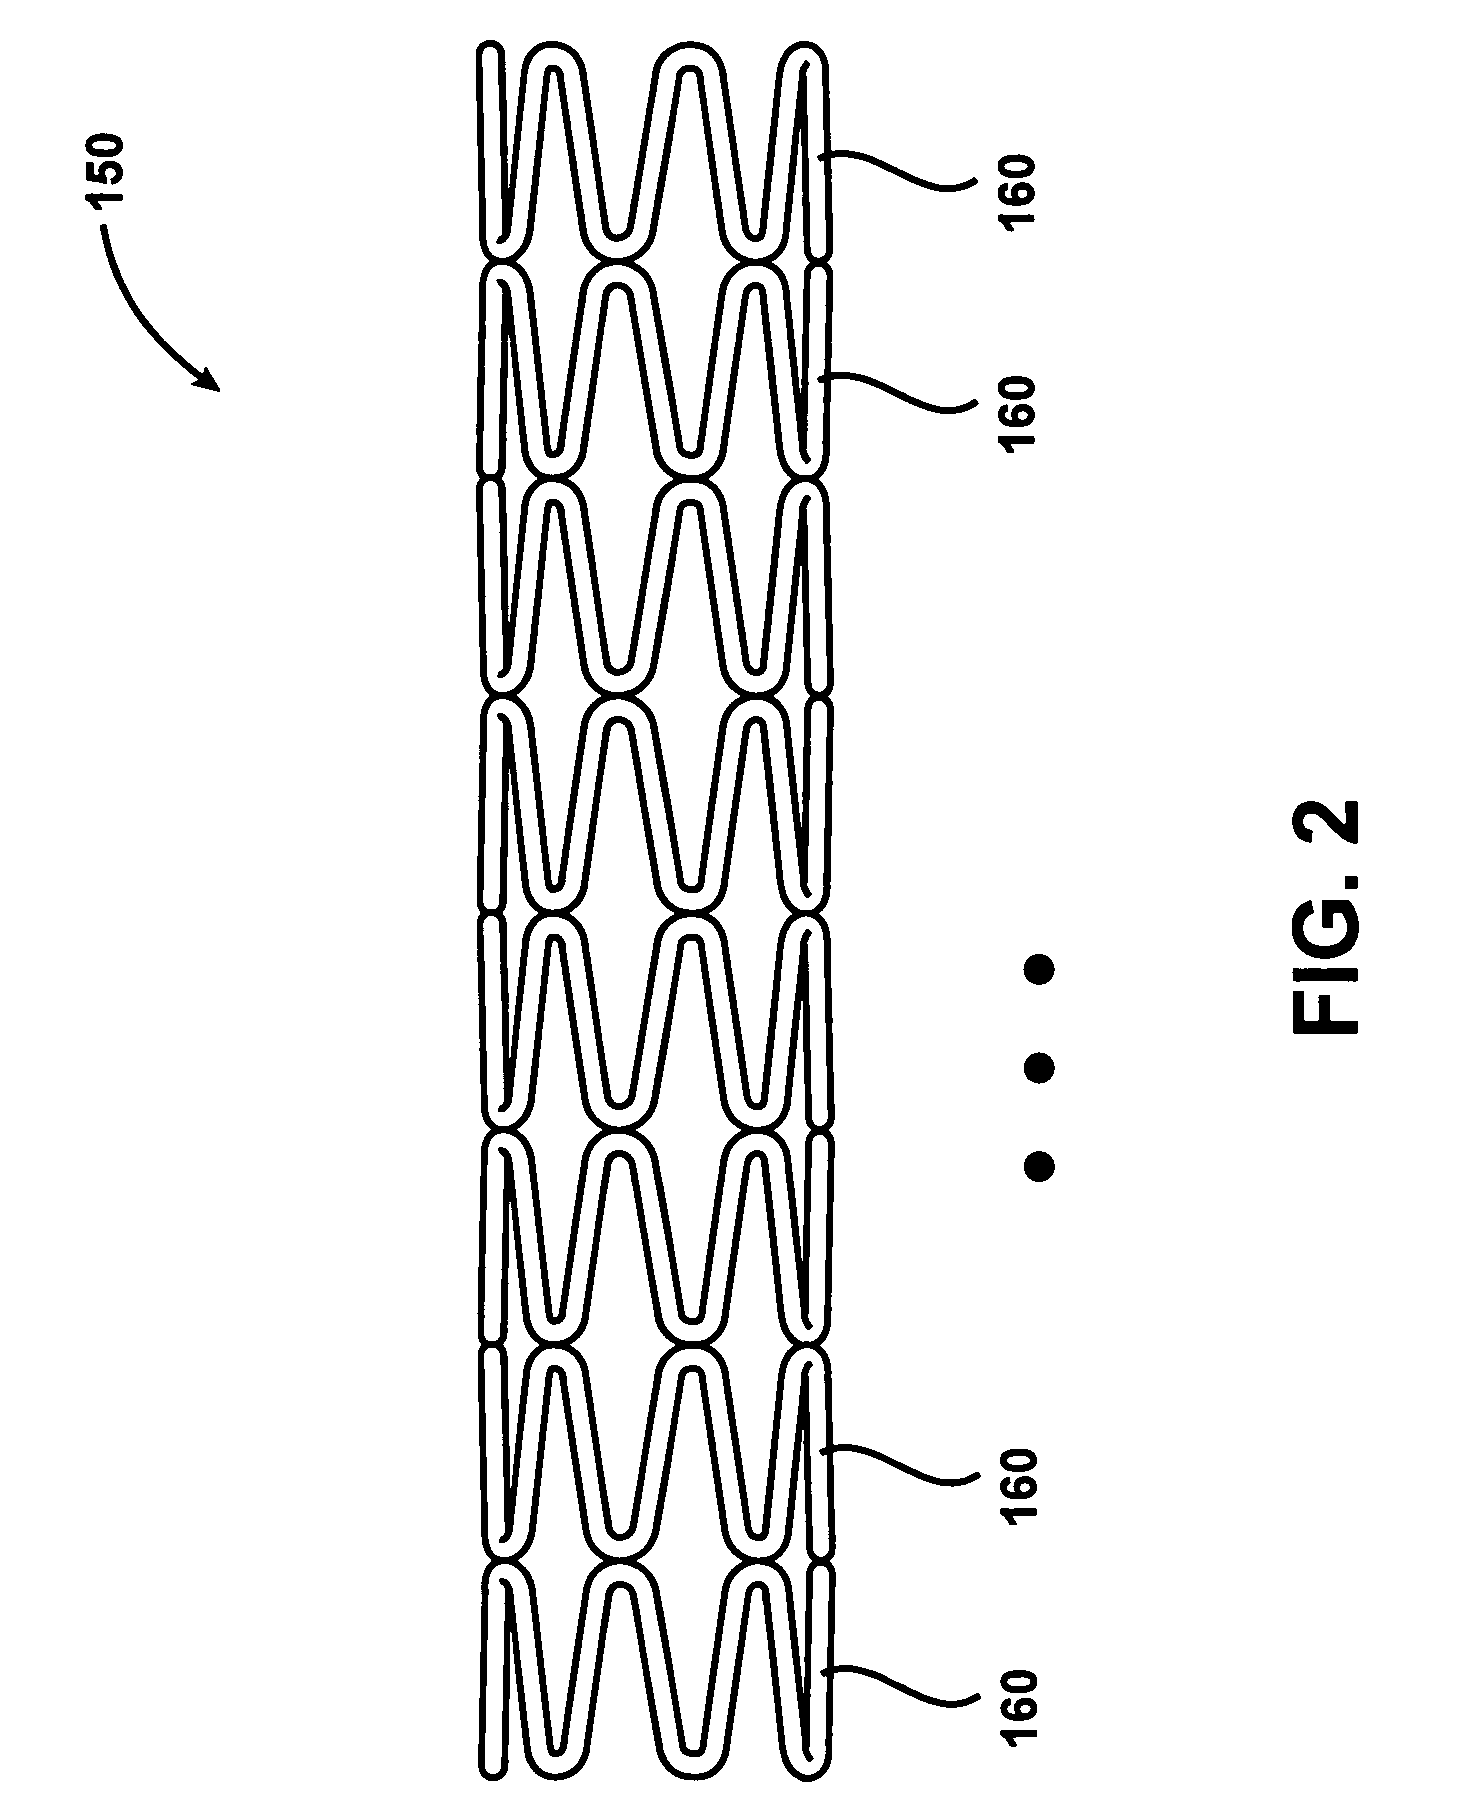 Stent with outer slough coating